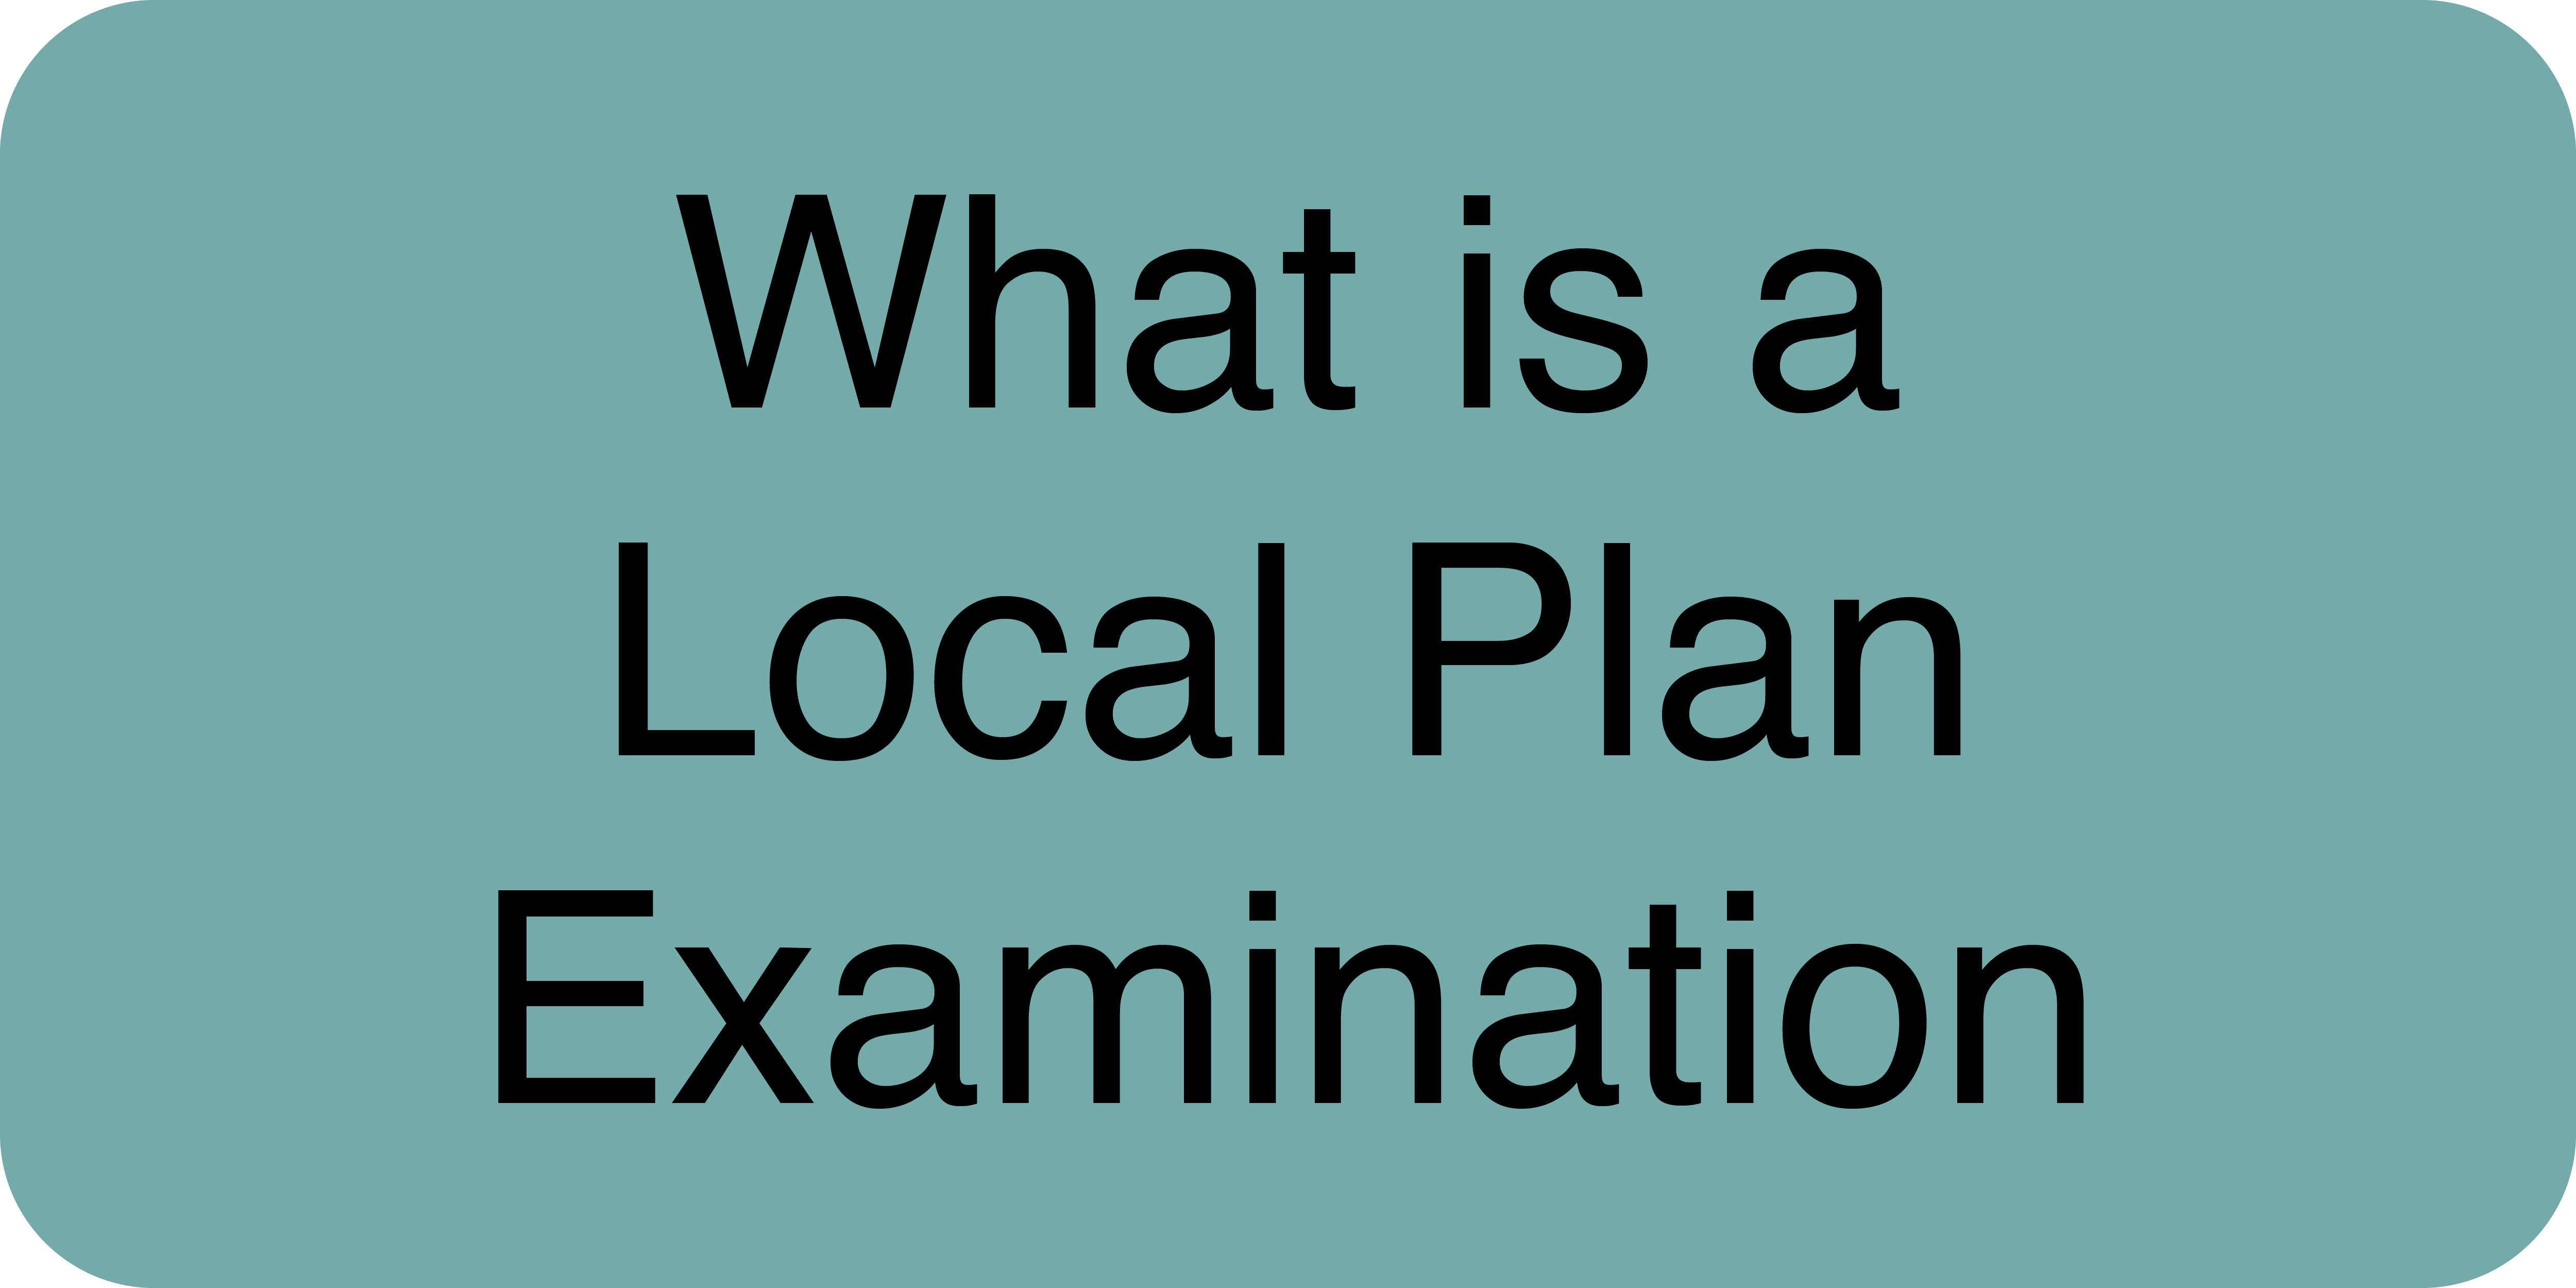 What is a Local Plan Examination?